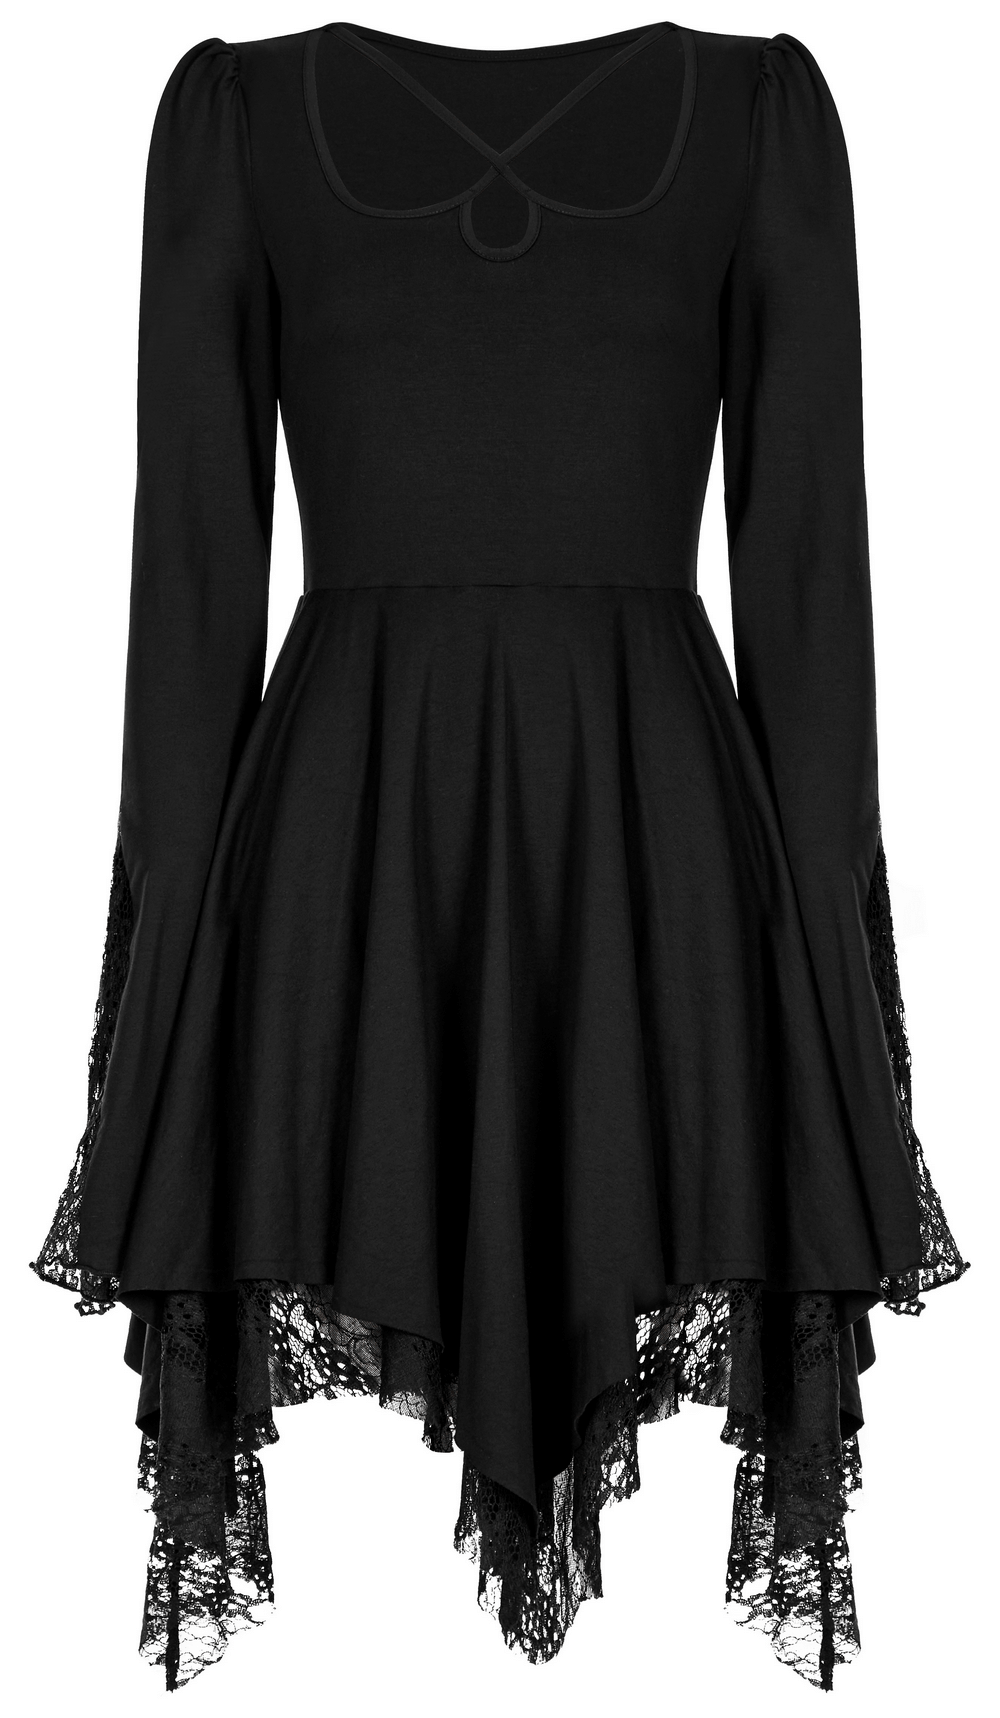 Punk Rave Black Gothic Dress with Lace Detailing